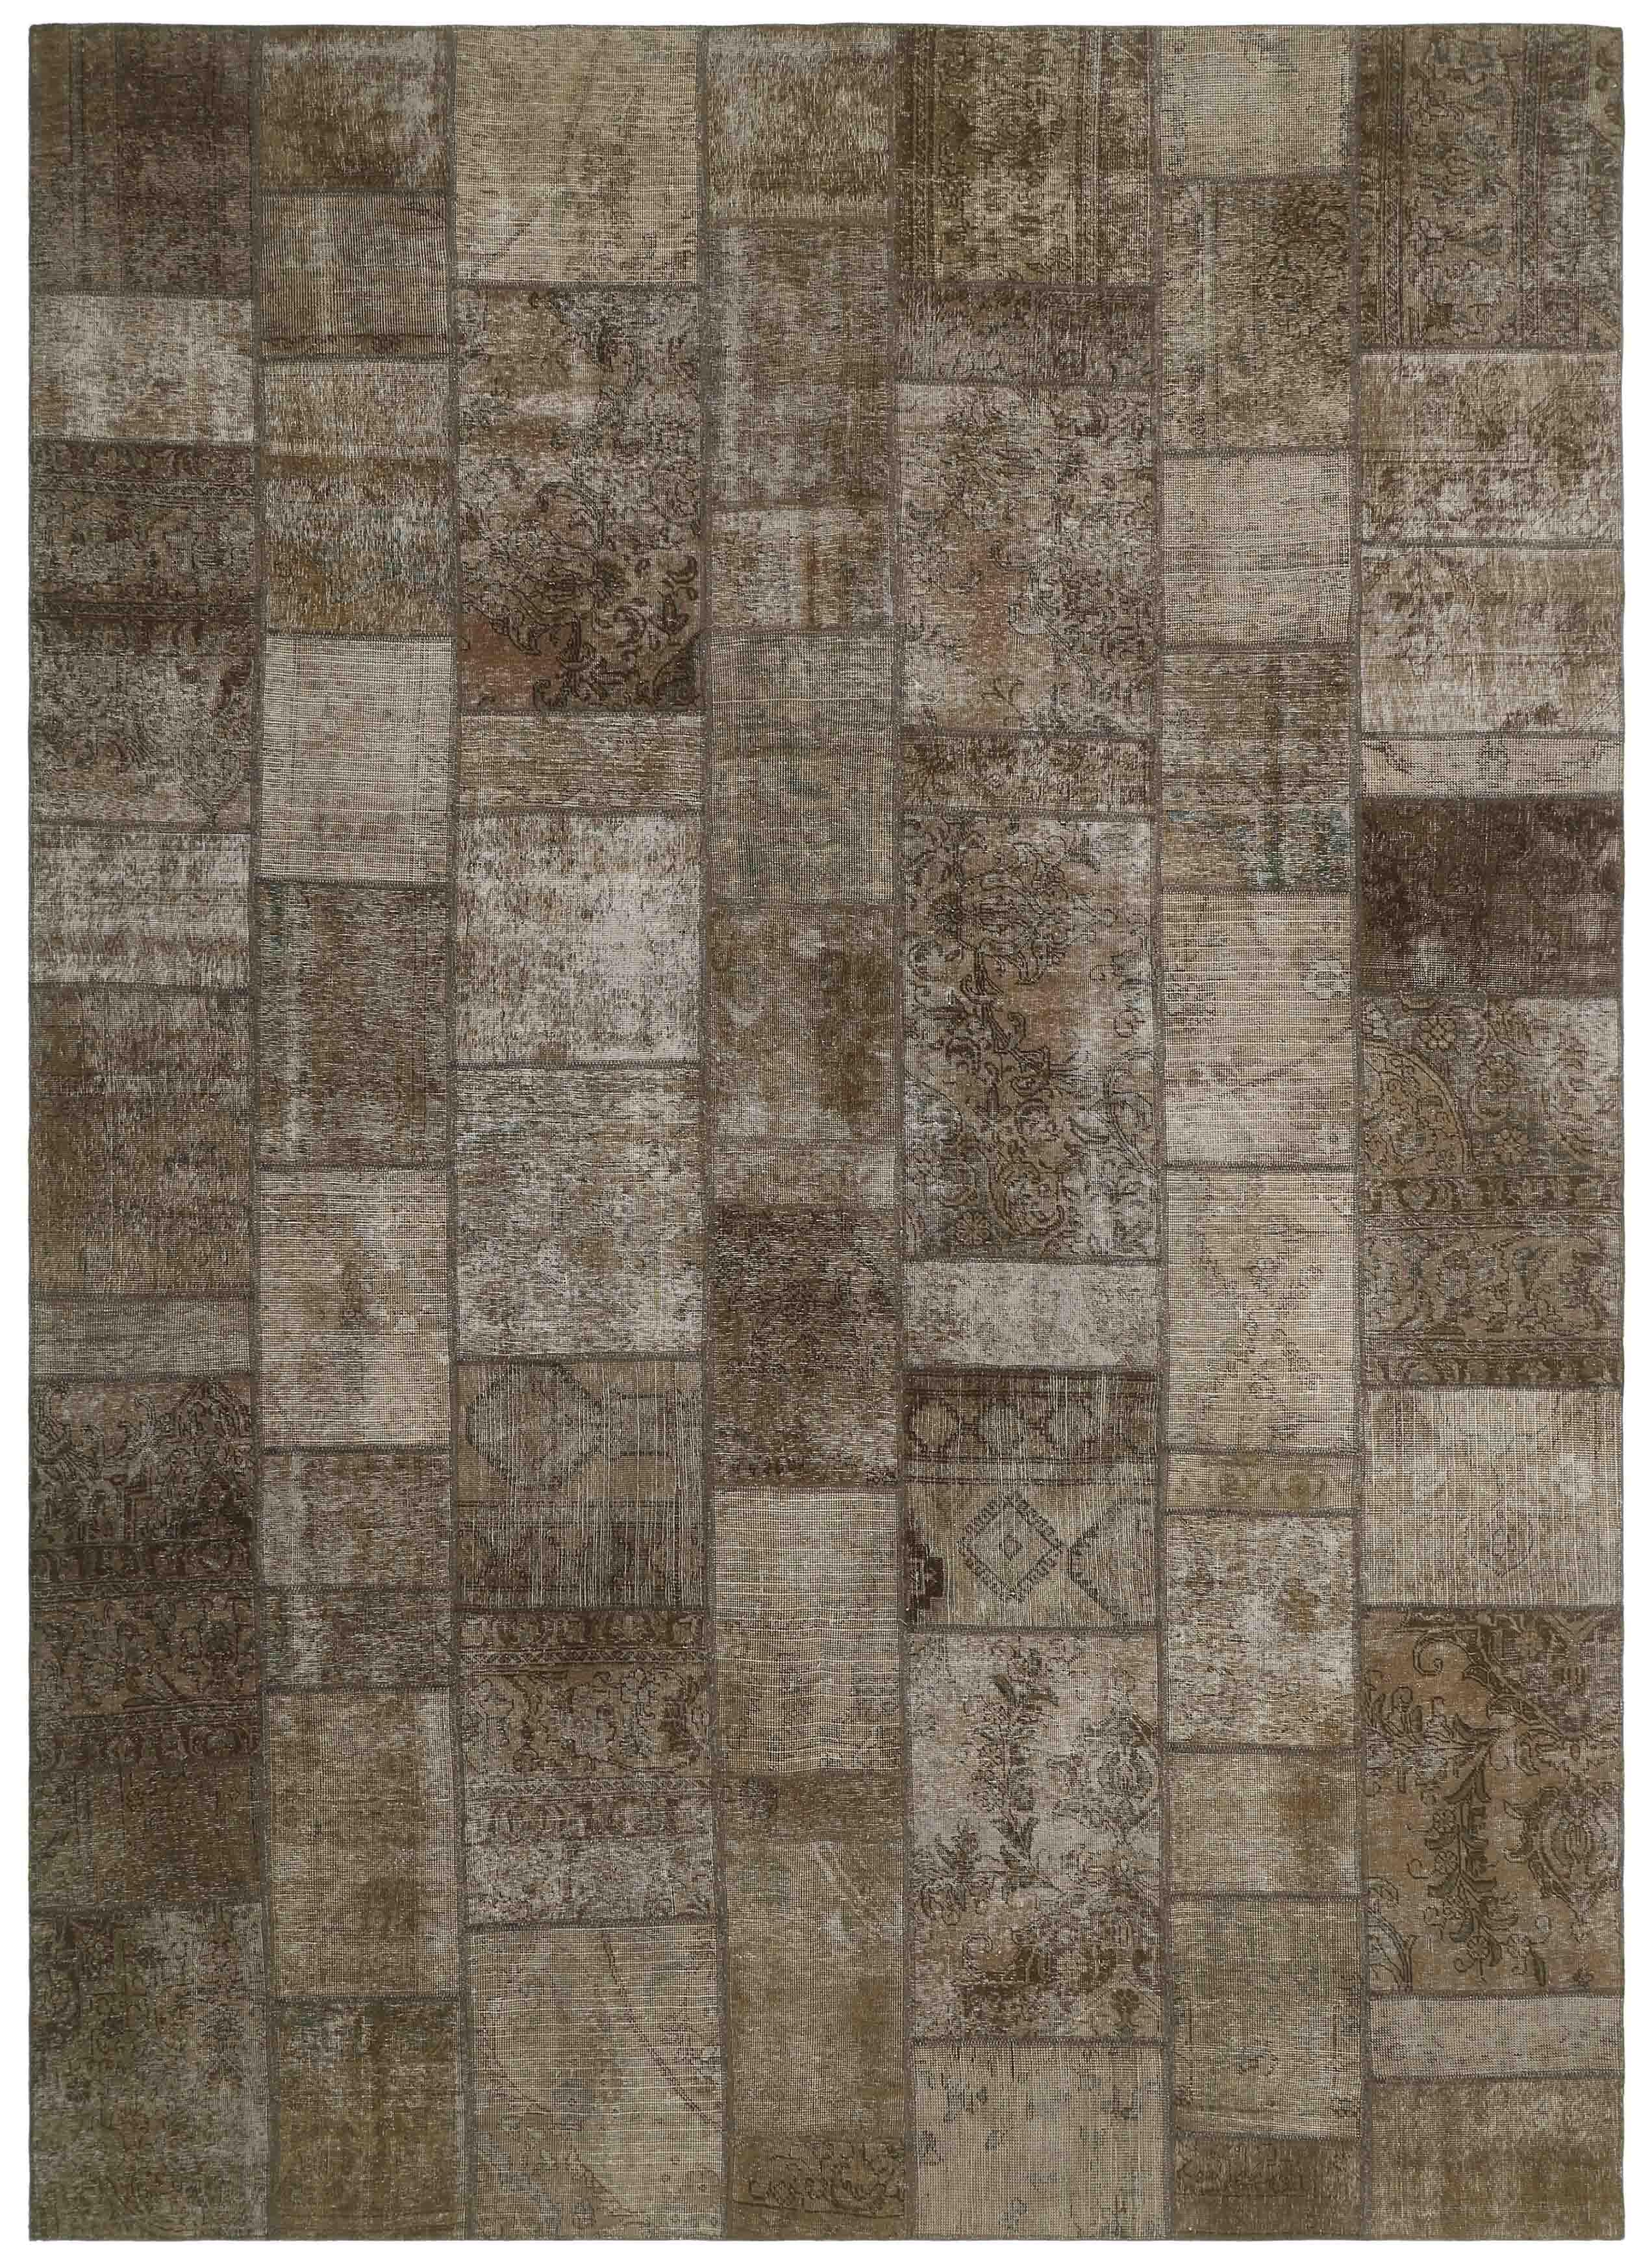 Authentic brown patchwork persian rug